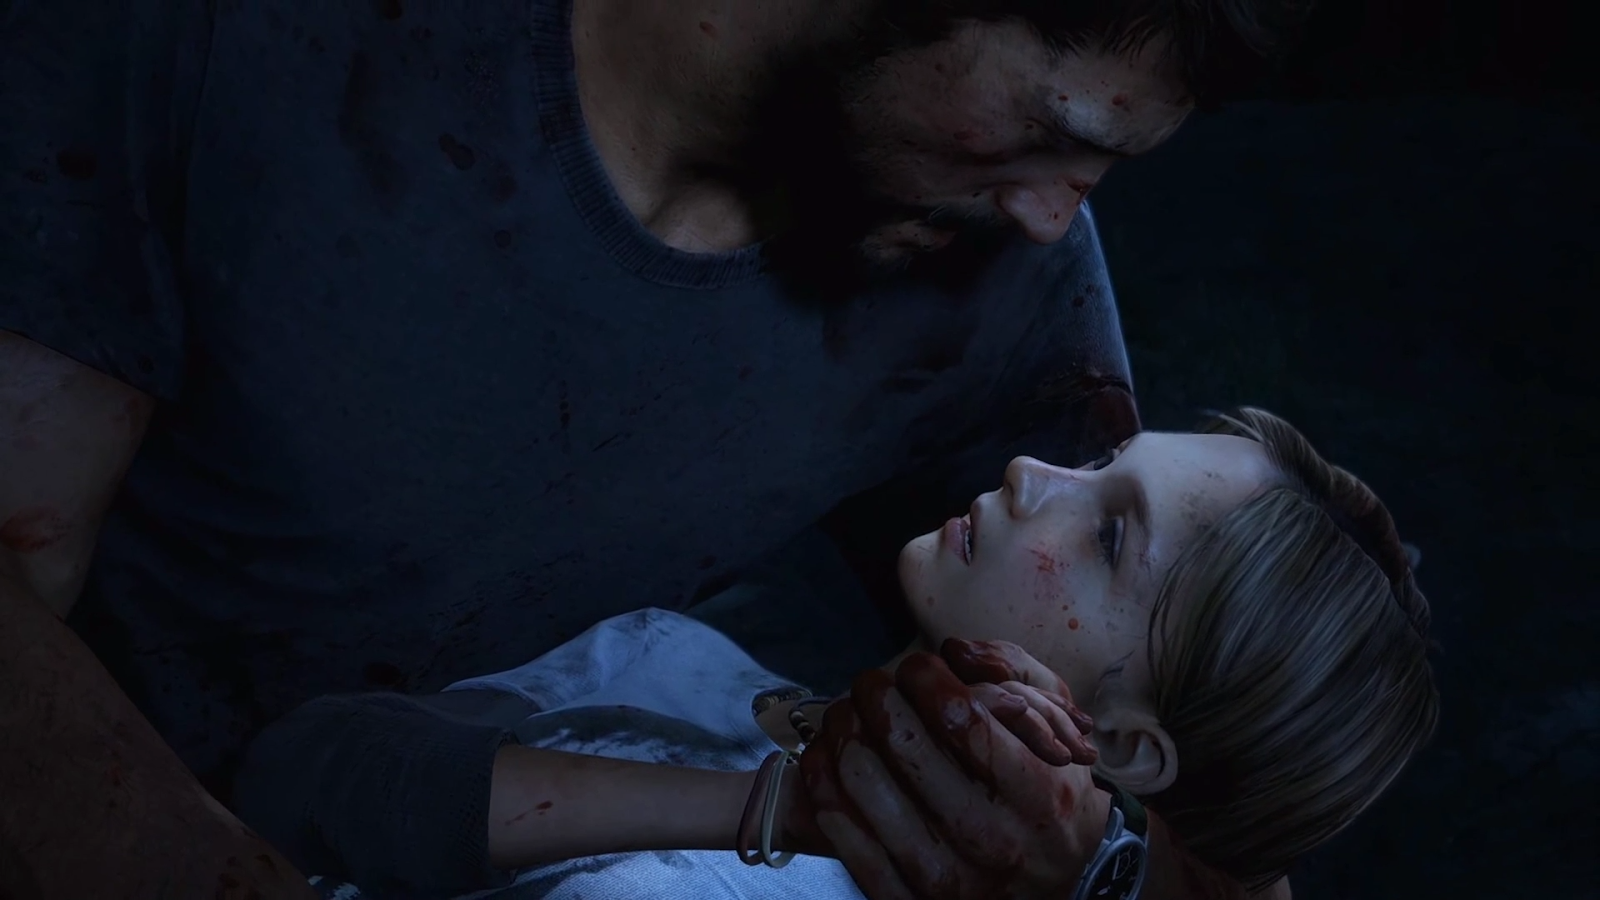 The Last of Us 2 is Not a Revenge Story - An Analysis - The Epilogue